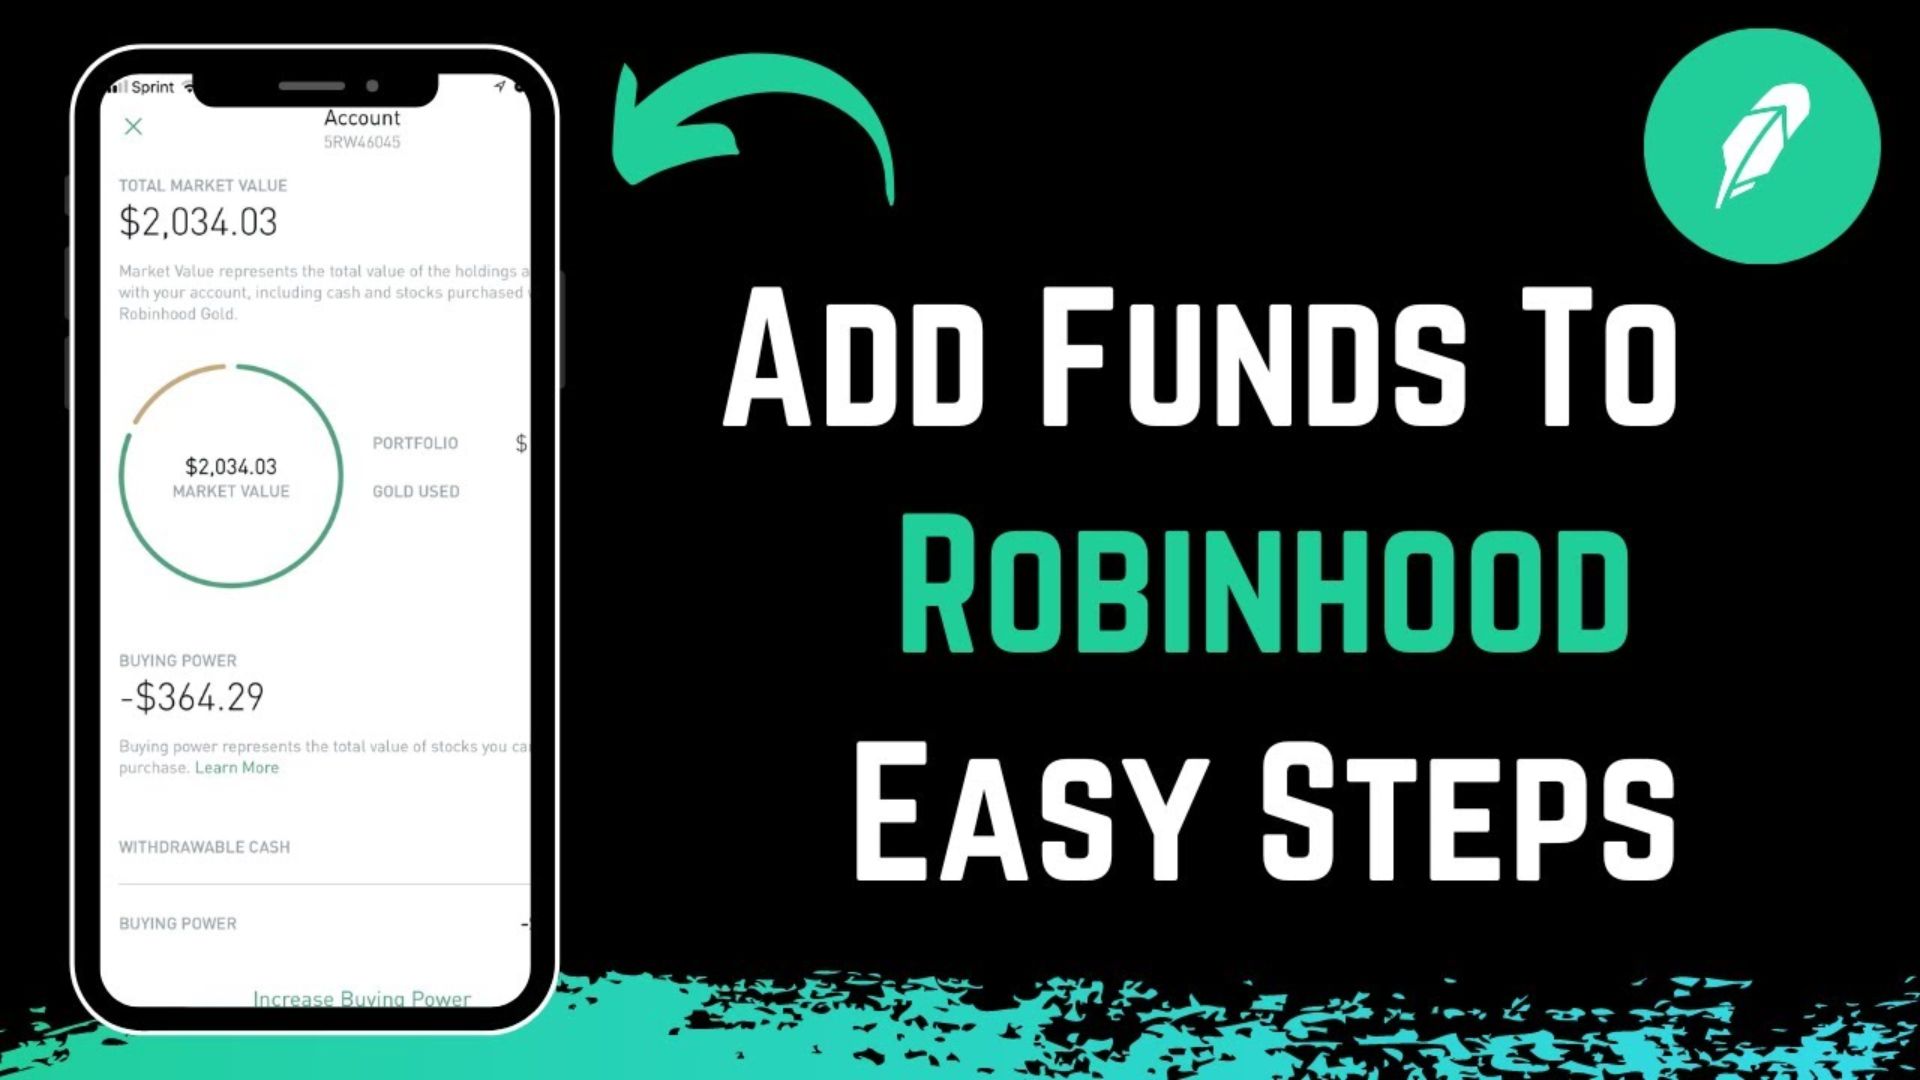 How to Add Funds to Robinhood